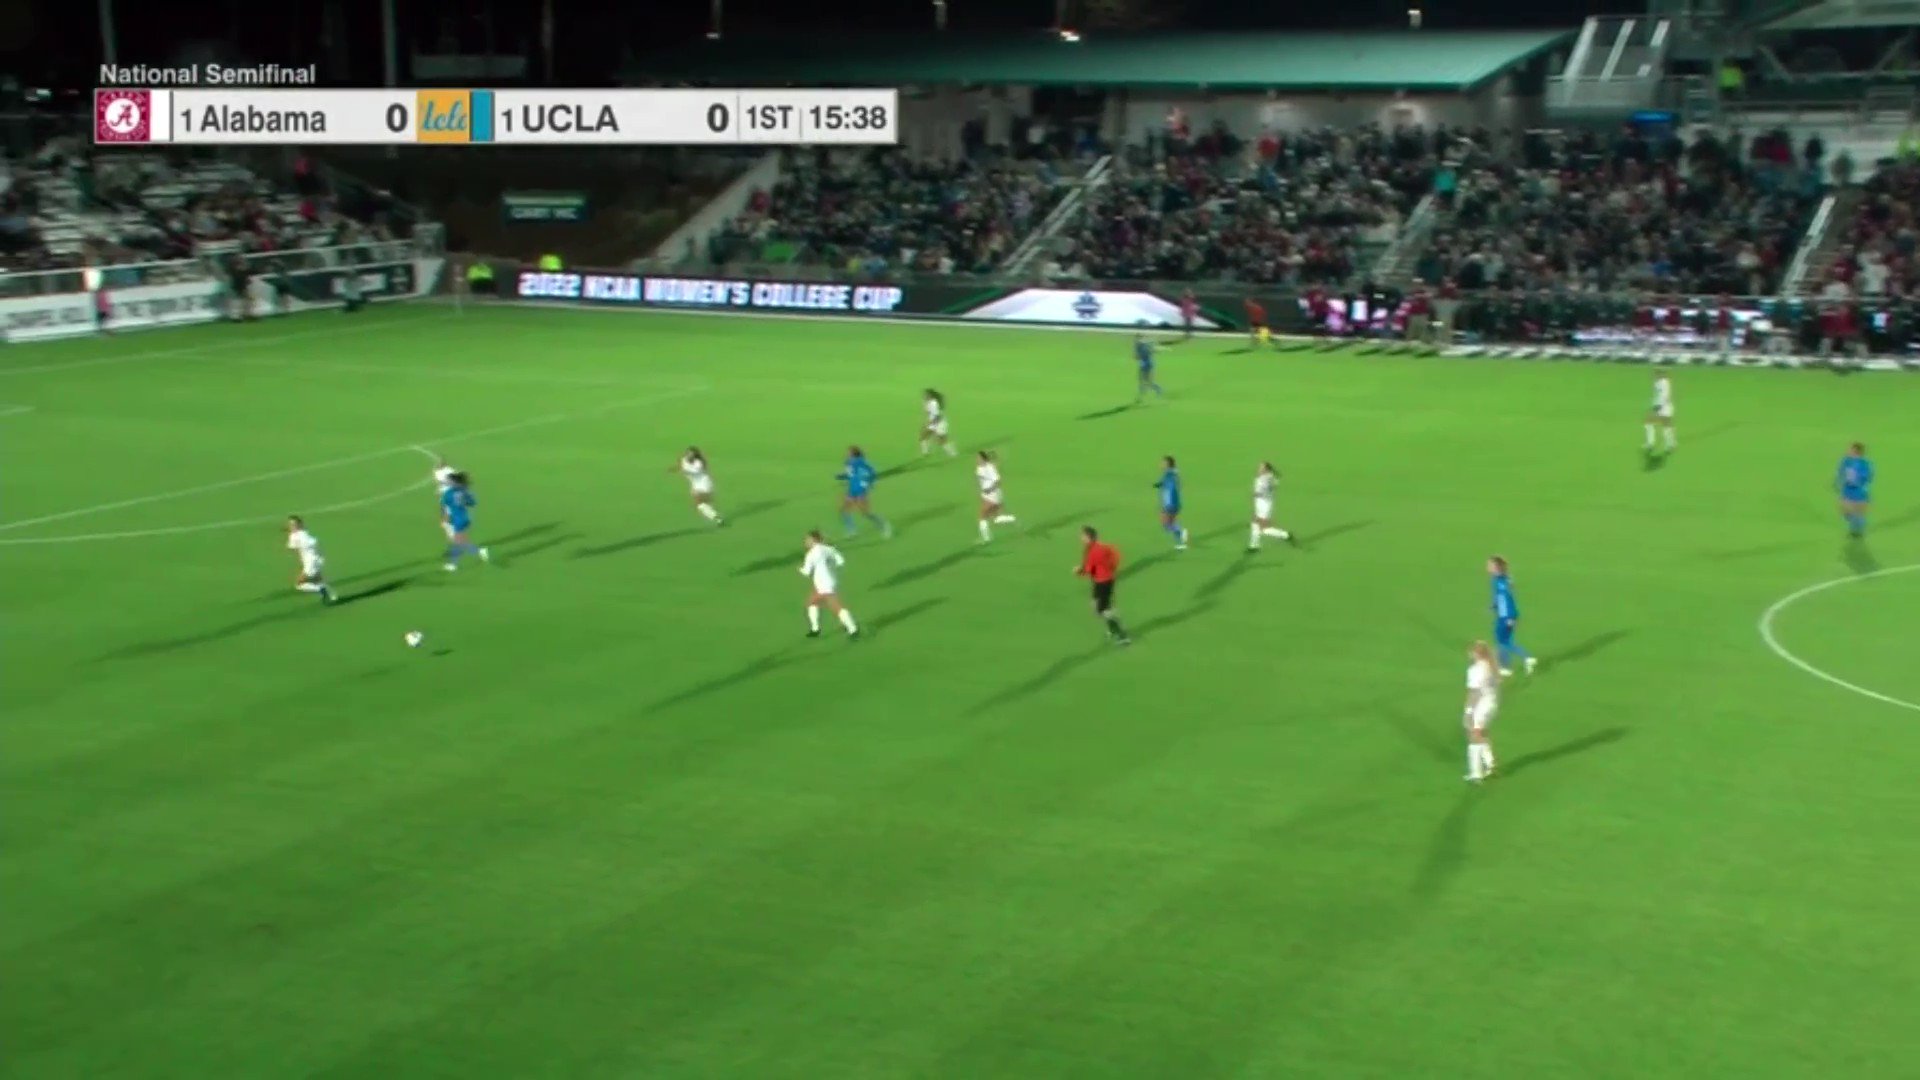 Give @QuincyMcMahon13 her flowers for getting @reilynturner that ball in front of goal to give UCLA the 1-0 lead in the NCAA semifinal!

📺: @ESPNU
📲: